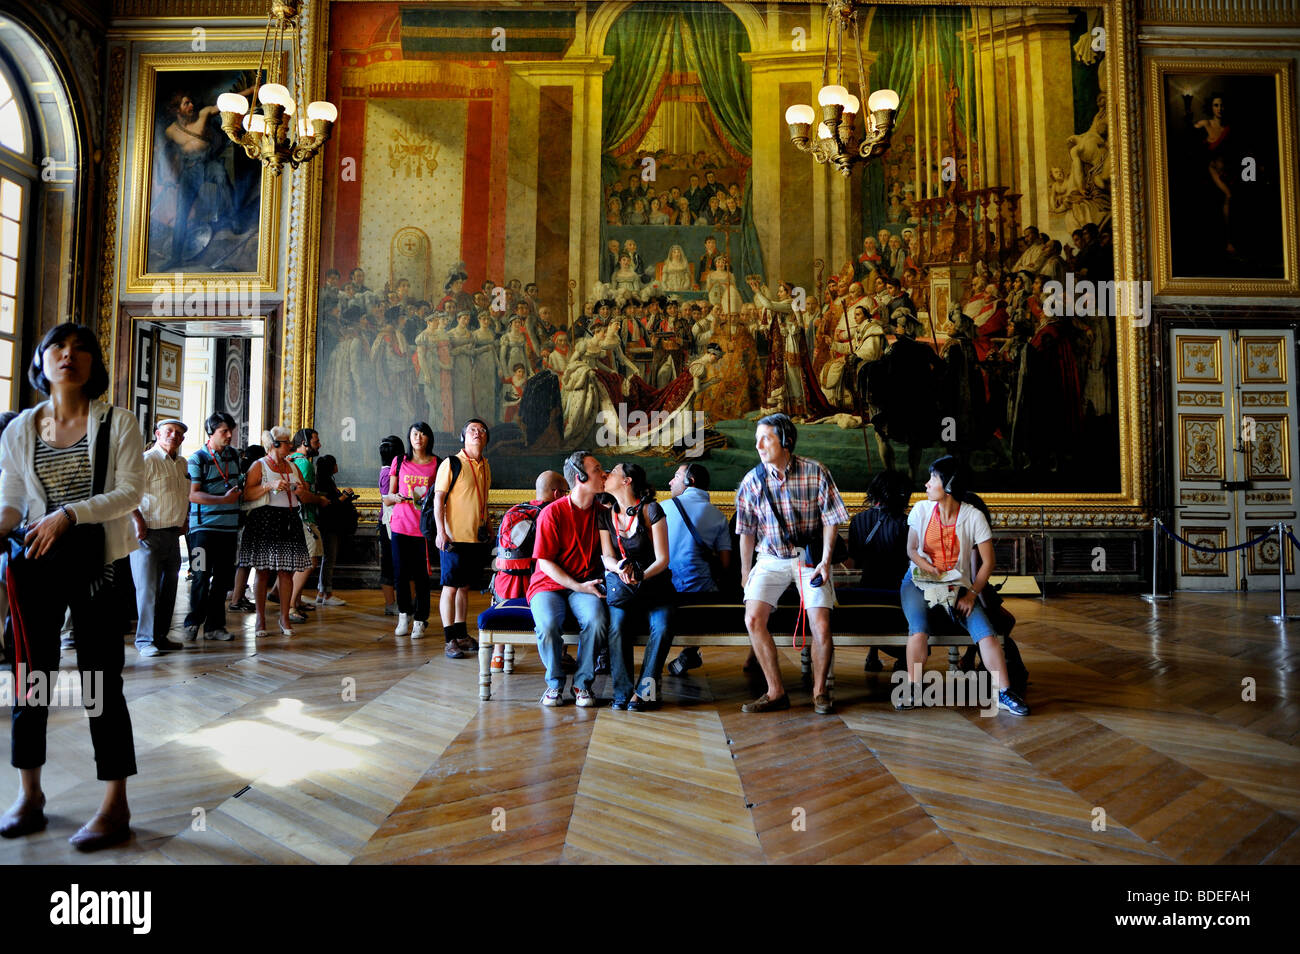 Versailles Palace - Tourists Visiting French Monument, 'Chateau de Versailles', inside Royal Apartments, Young COuple Kissing, Palace of Versailles Stock Photo